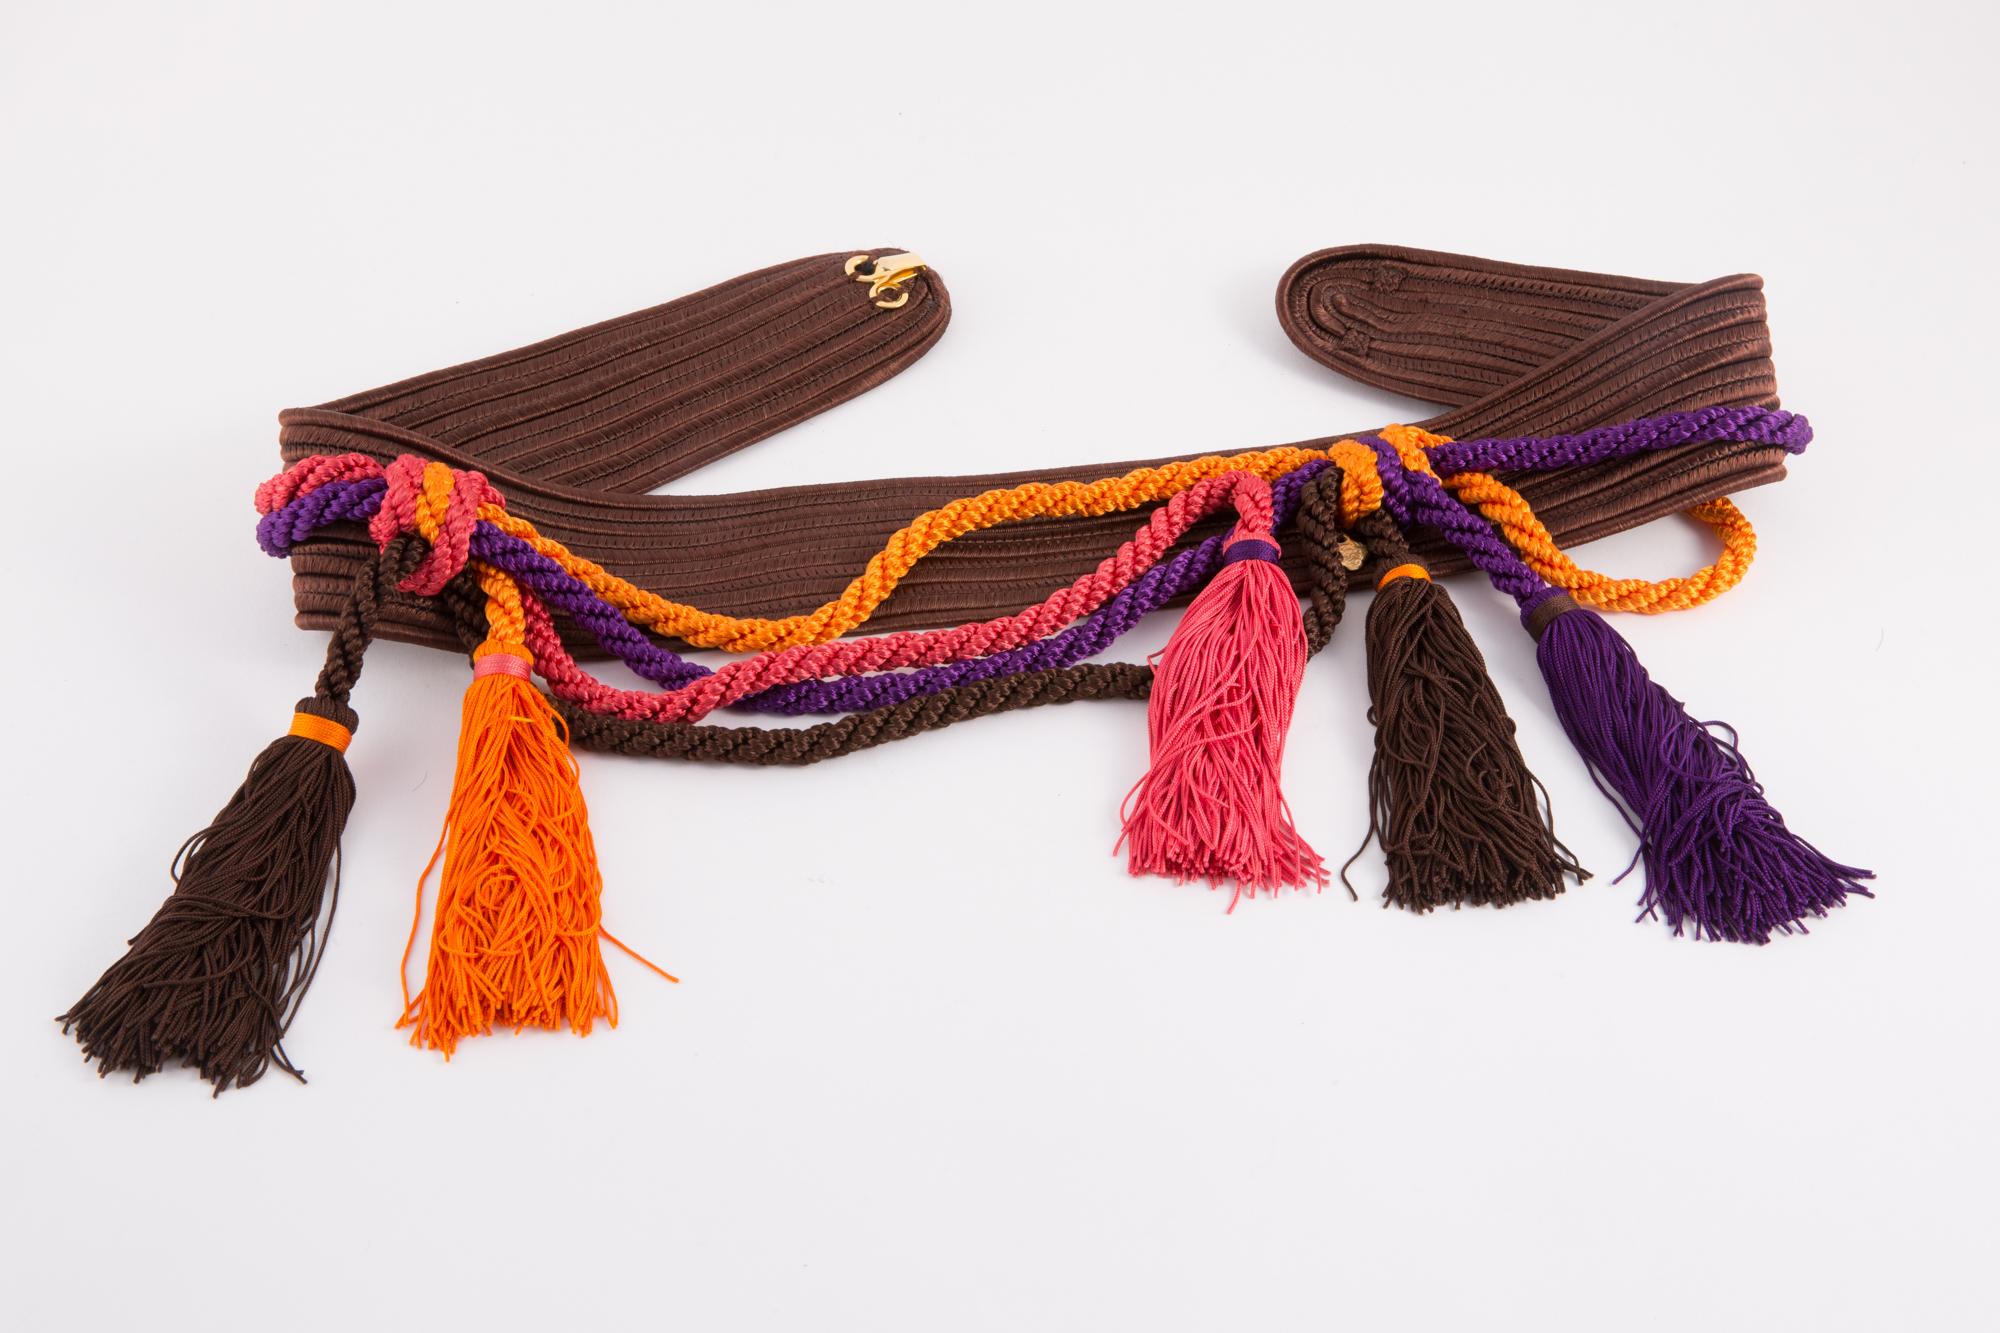 Multicolor Yves Saint Laurent braided belt featuring brown braided belt, and purple & orange fringed pompons, logo gold tone metallic plaque. See catwalk 1991s photo.
In excellent vintage condition. Made in France. 
Maxi Length 31.4in. (80cm)
Width